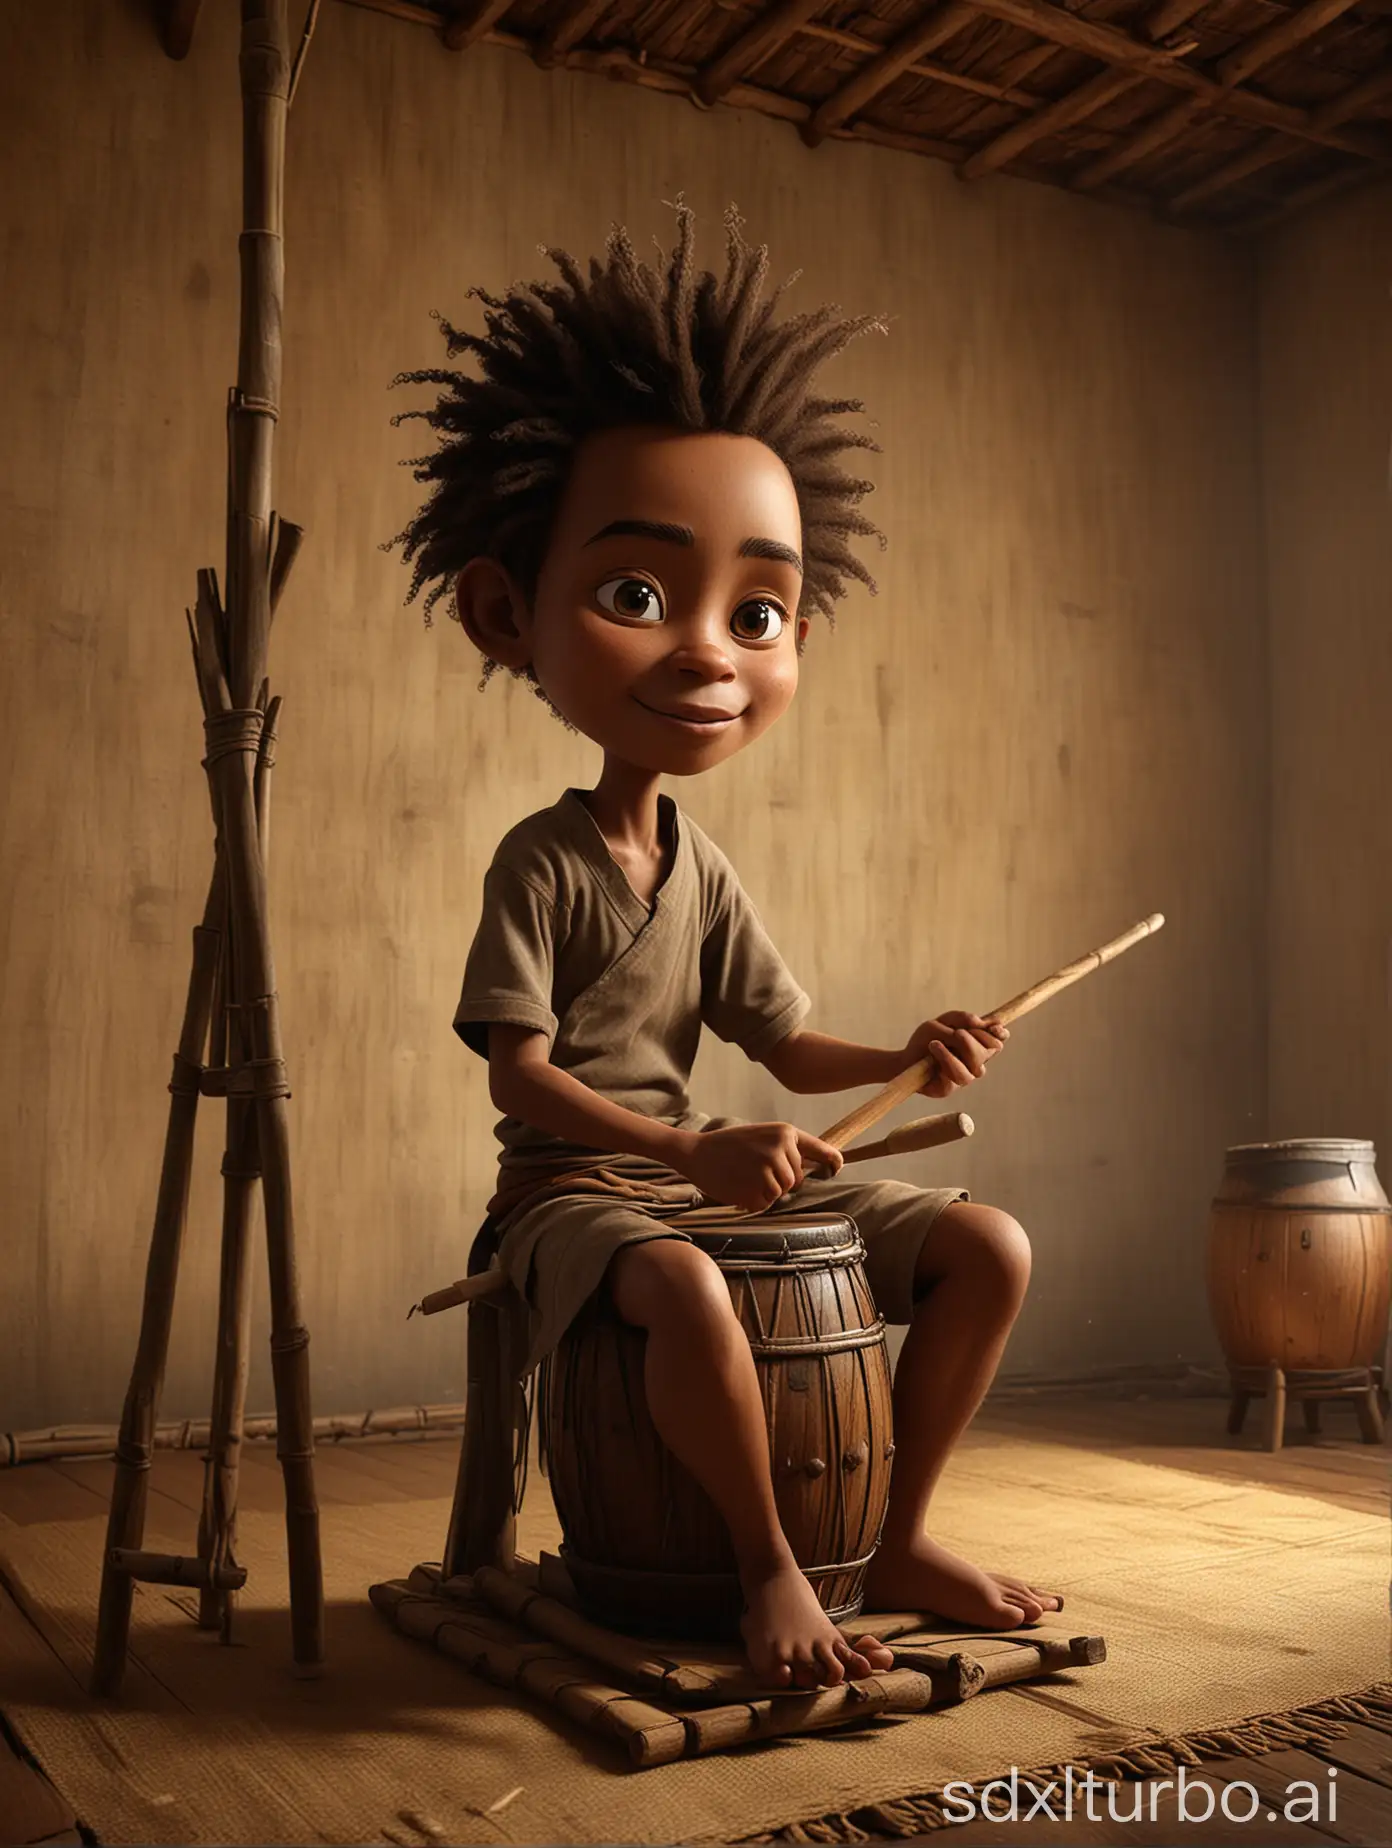 Create a realistic 3D cartoon style full body caricature with a big head. A young Indonesian Papuan people swirl hair man is sitting in an old wooden stake playing an traditional drum facing the camera. In front of him you can see a clear glass containing a black liquid like coffee which is placed on an old brown wooden stake. Beside him there was a young woman sitting enjoying the song. A soft silhouette of light from above illuminates the young man who is busy playing the traditional drum. Dramatic lighting adds to the beauty of the atmosphere in the traditional bamboo rooms. Use soft photography lighting. Light from above, from behind, UHD, HD, high quality image.